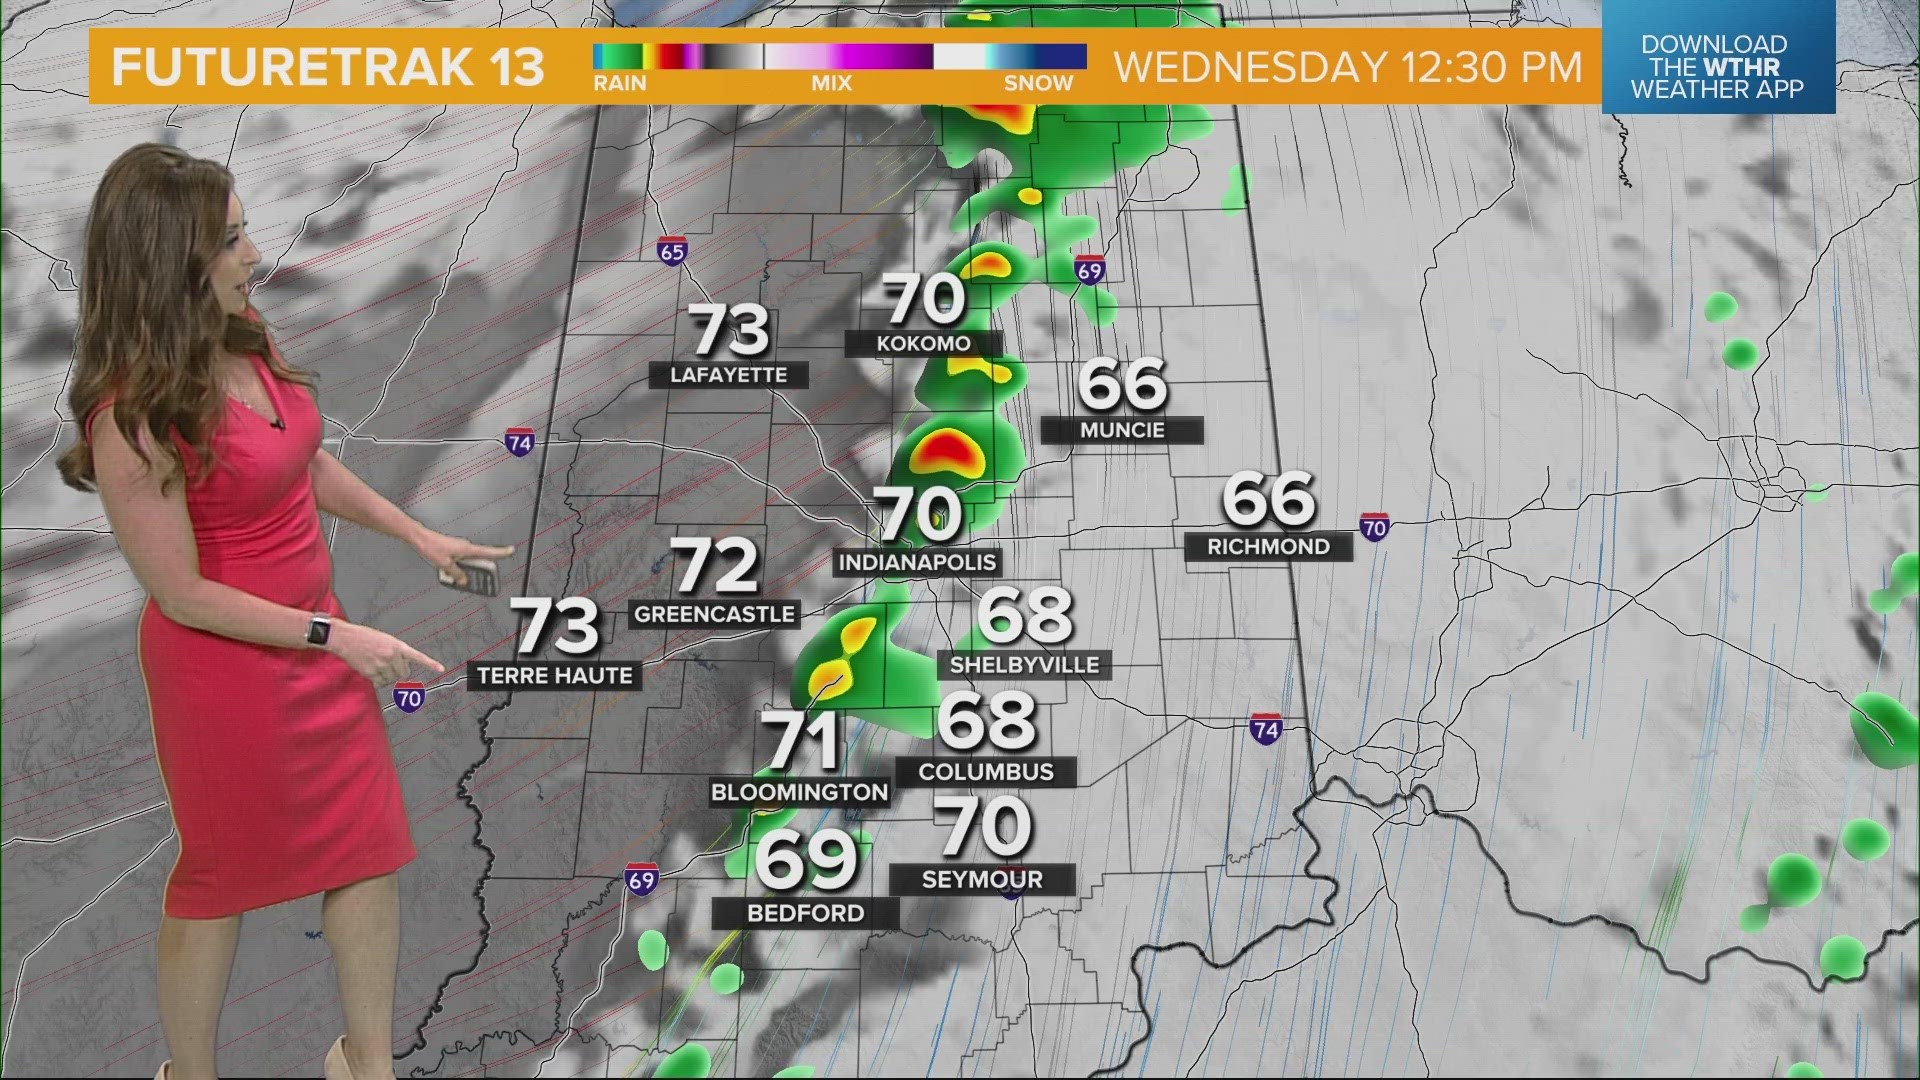 Scattered showers and storms will interrupt outdoor plans at times on Tuesday, but it won't be a washout.